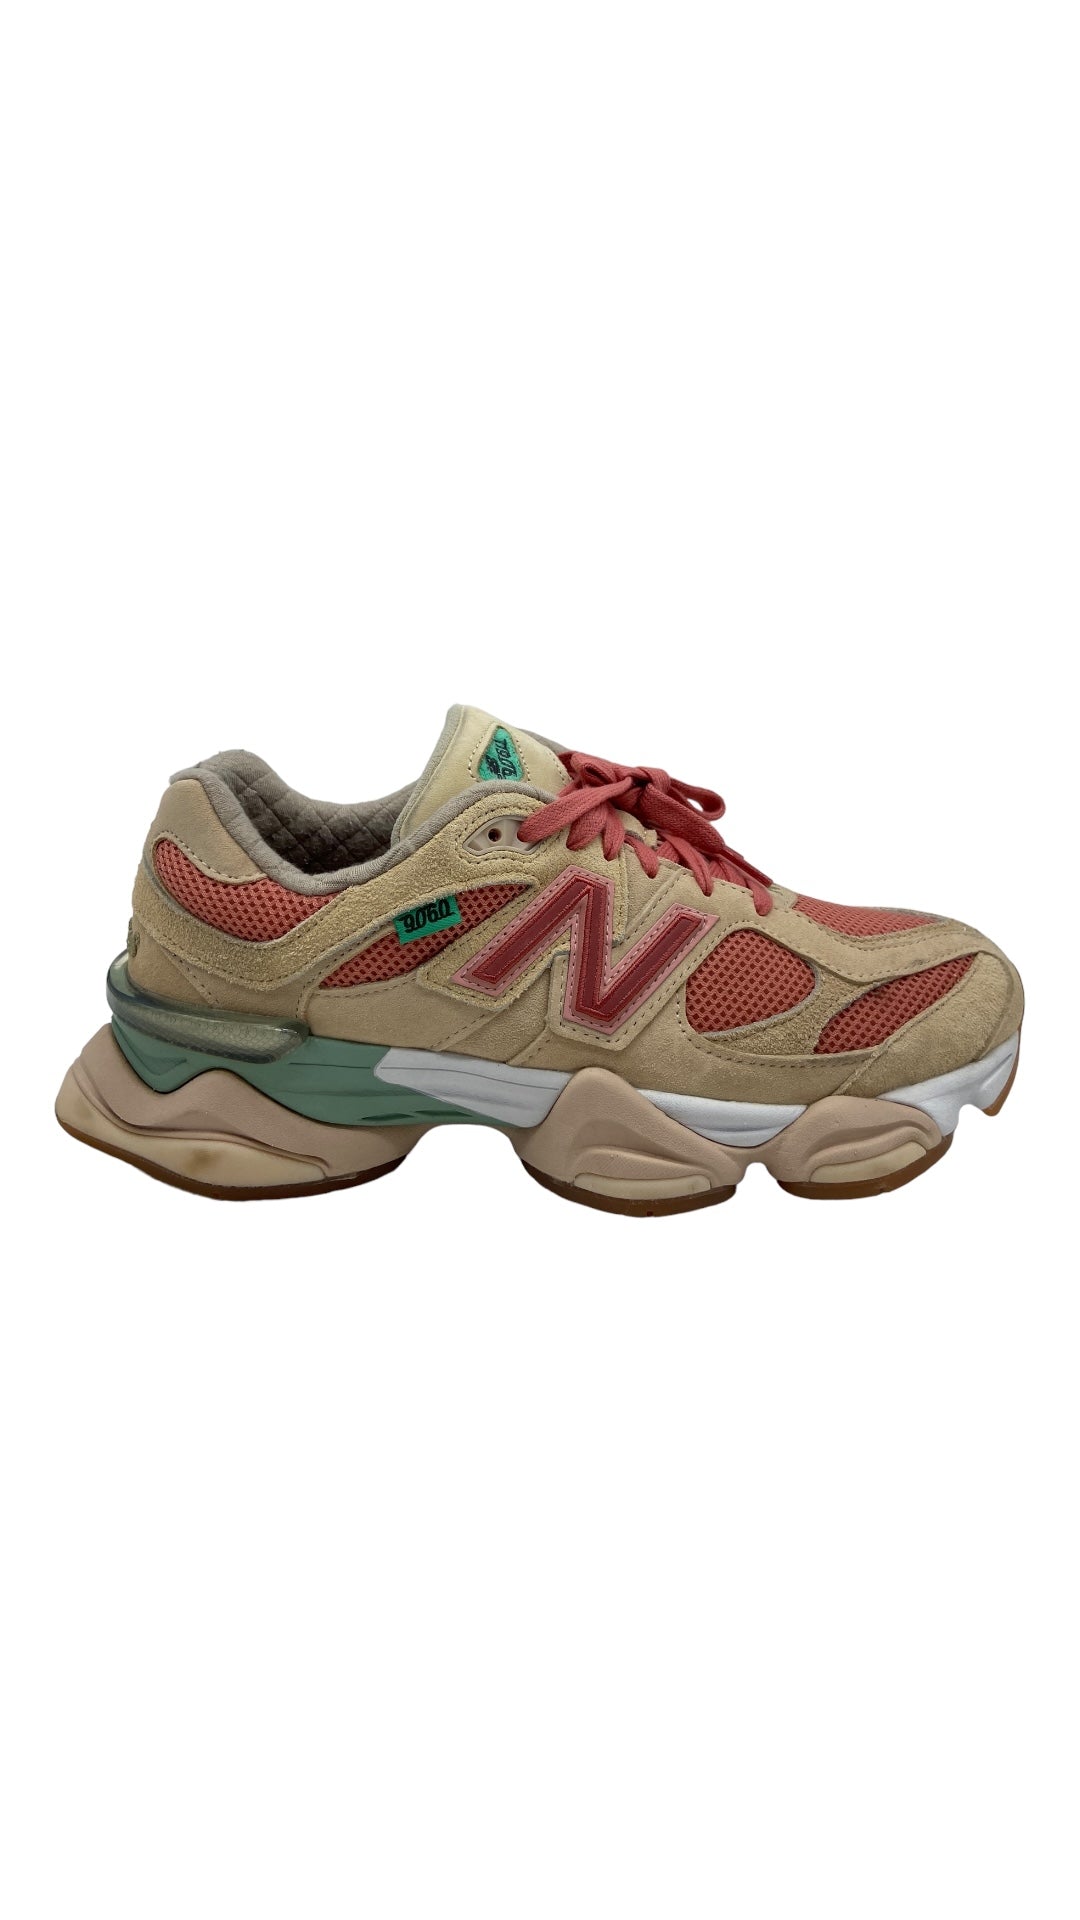 Preowned New Balance 9060 Joe Freshgoods Inside Voices Penny Cookie Pink Sz 9.5/11W